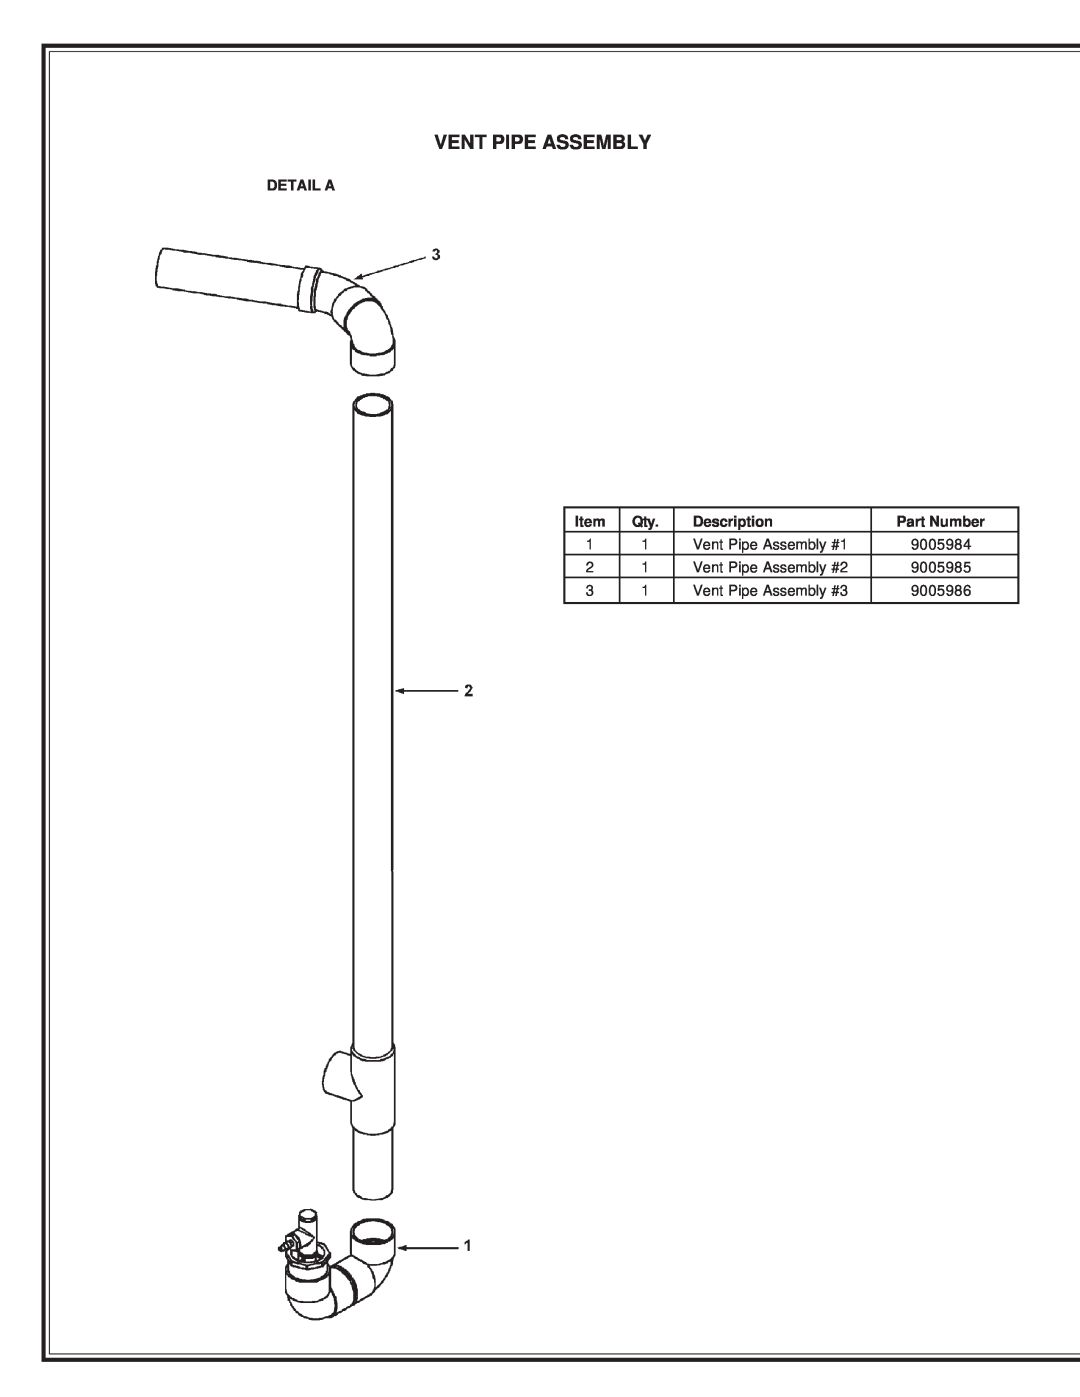 State Industries GP6 50 YTVIT manual Vent Pipe Assembly, Detail A, Description, Part Number 